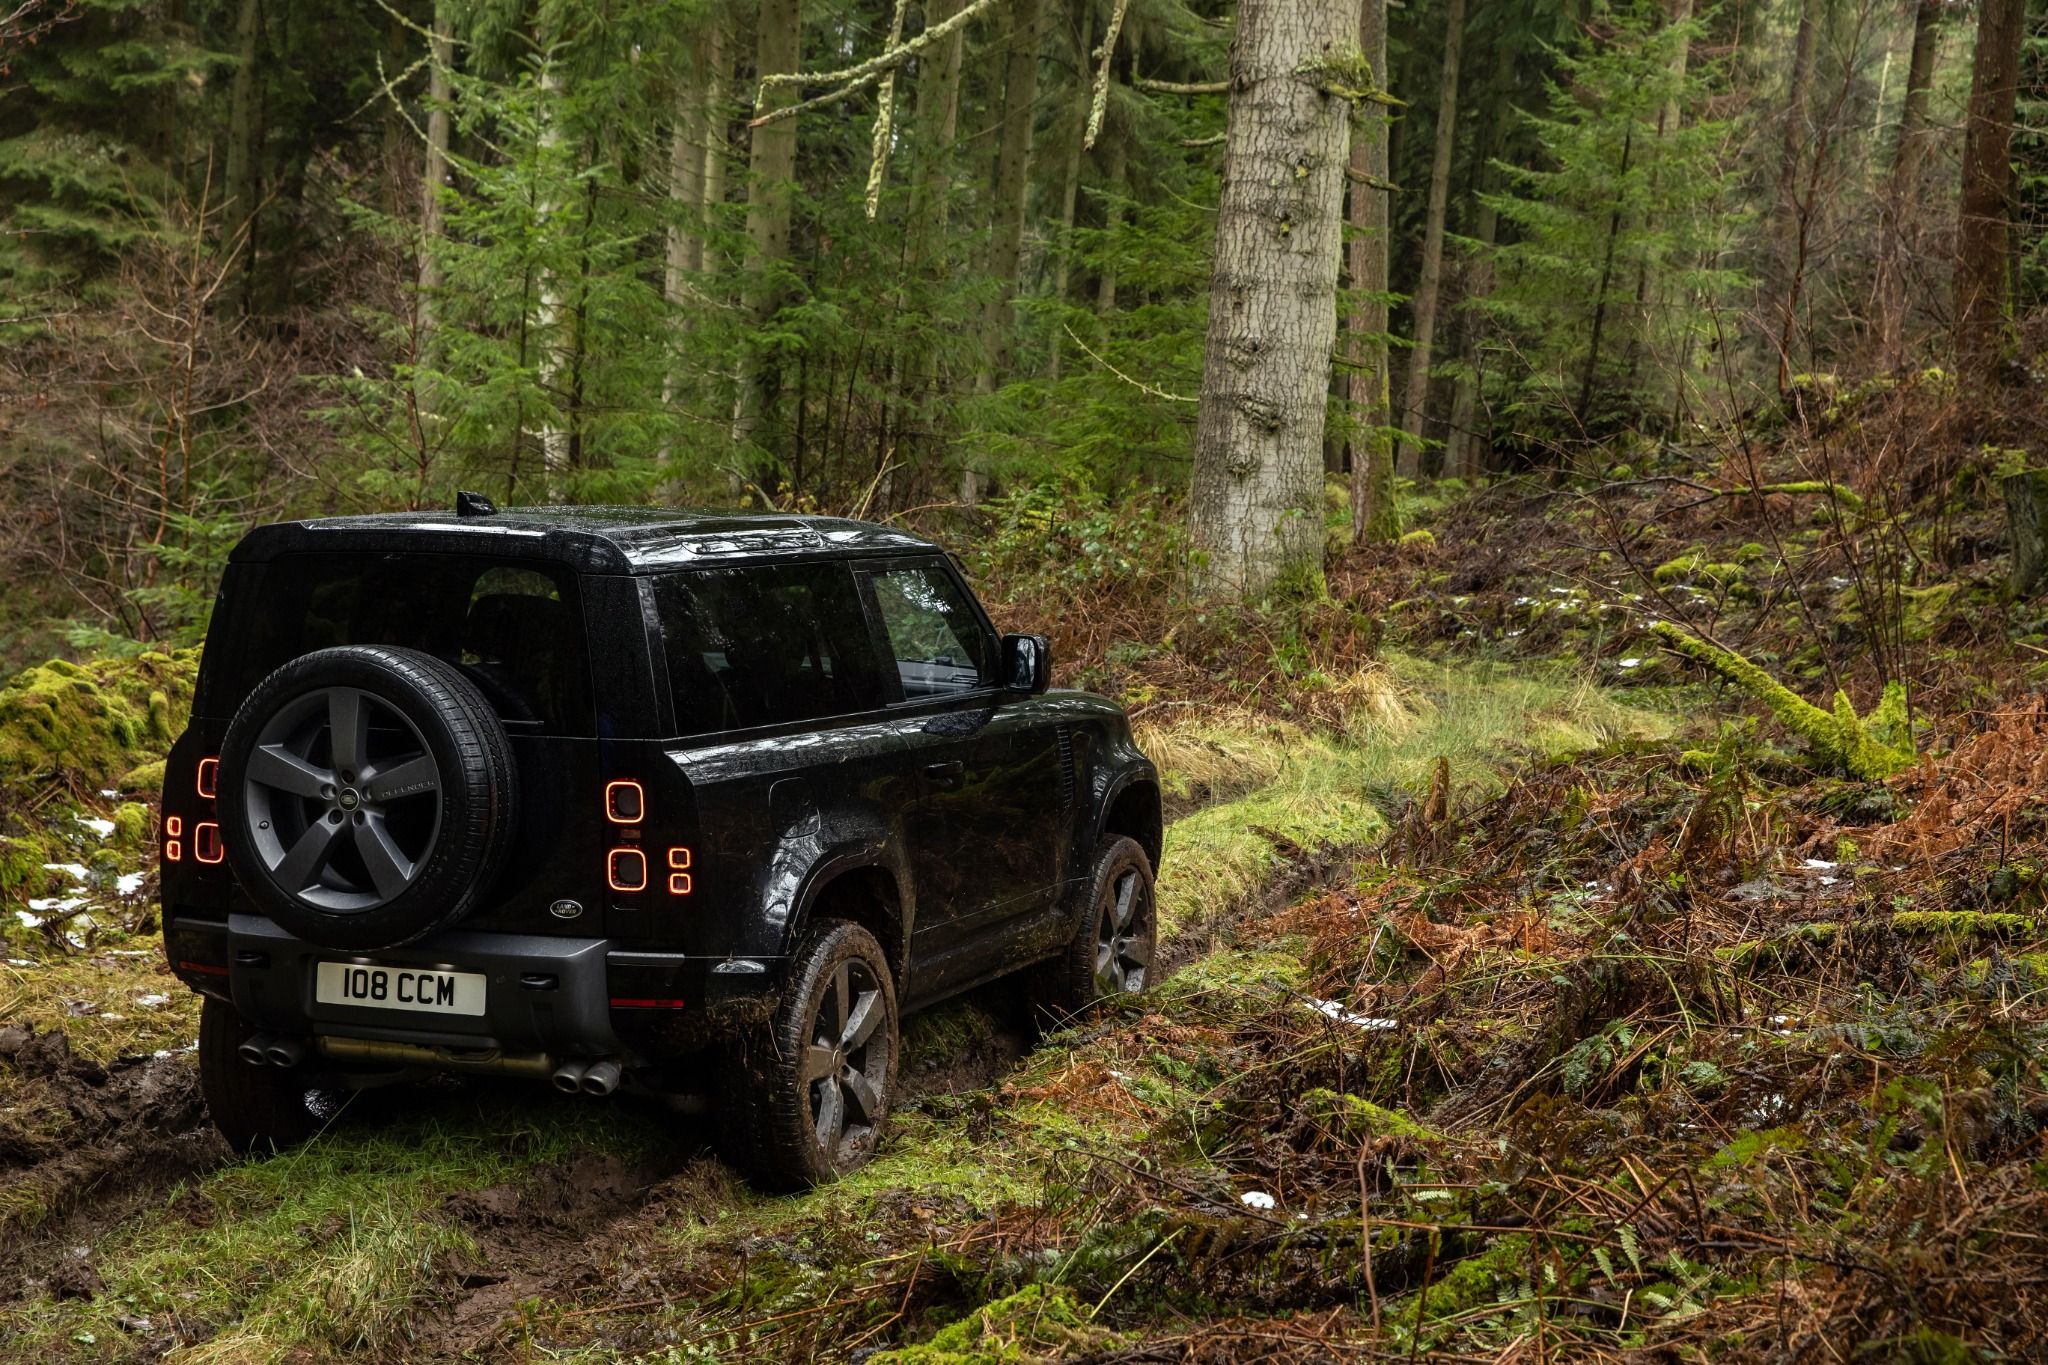 Land Rover Defender V8 review: supercharged 4x4 tested Reviews